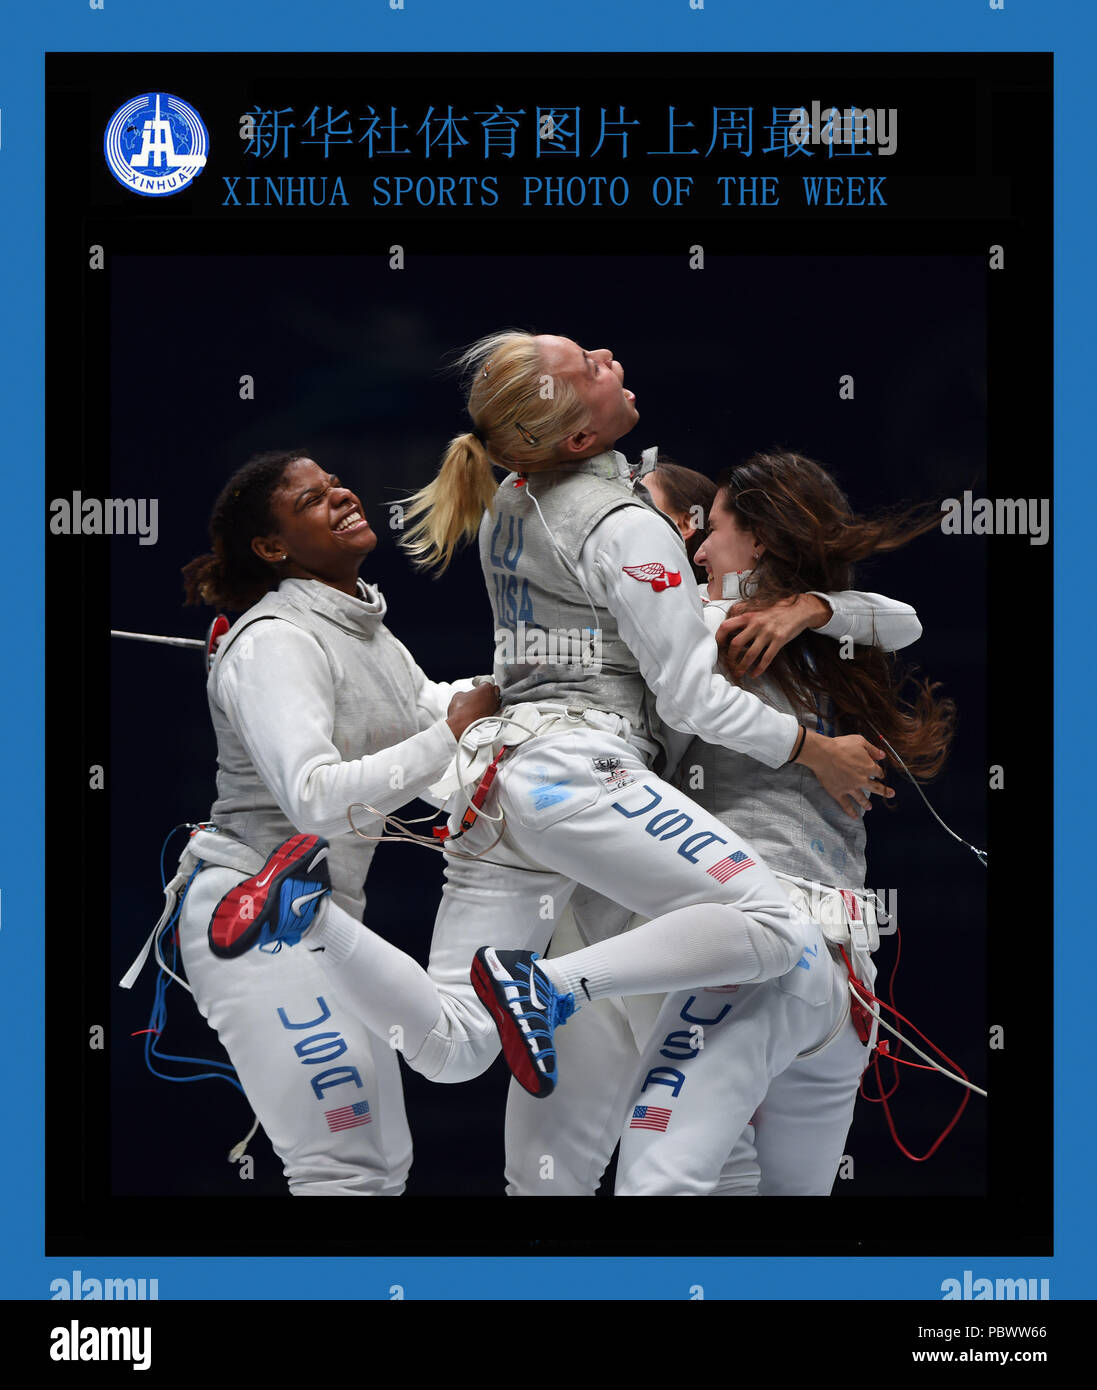 XINHUA SPORTS PHOTO OF THE WEEK (from July 24 to July 31, 2018) TRANSMITTED ON July 31, 2018 Stock Photo